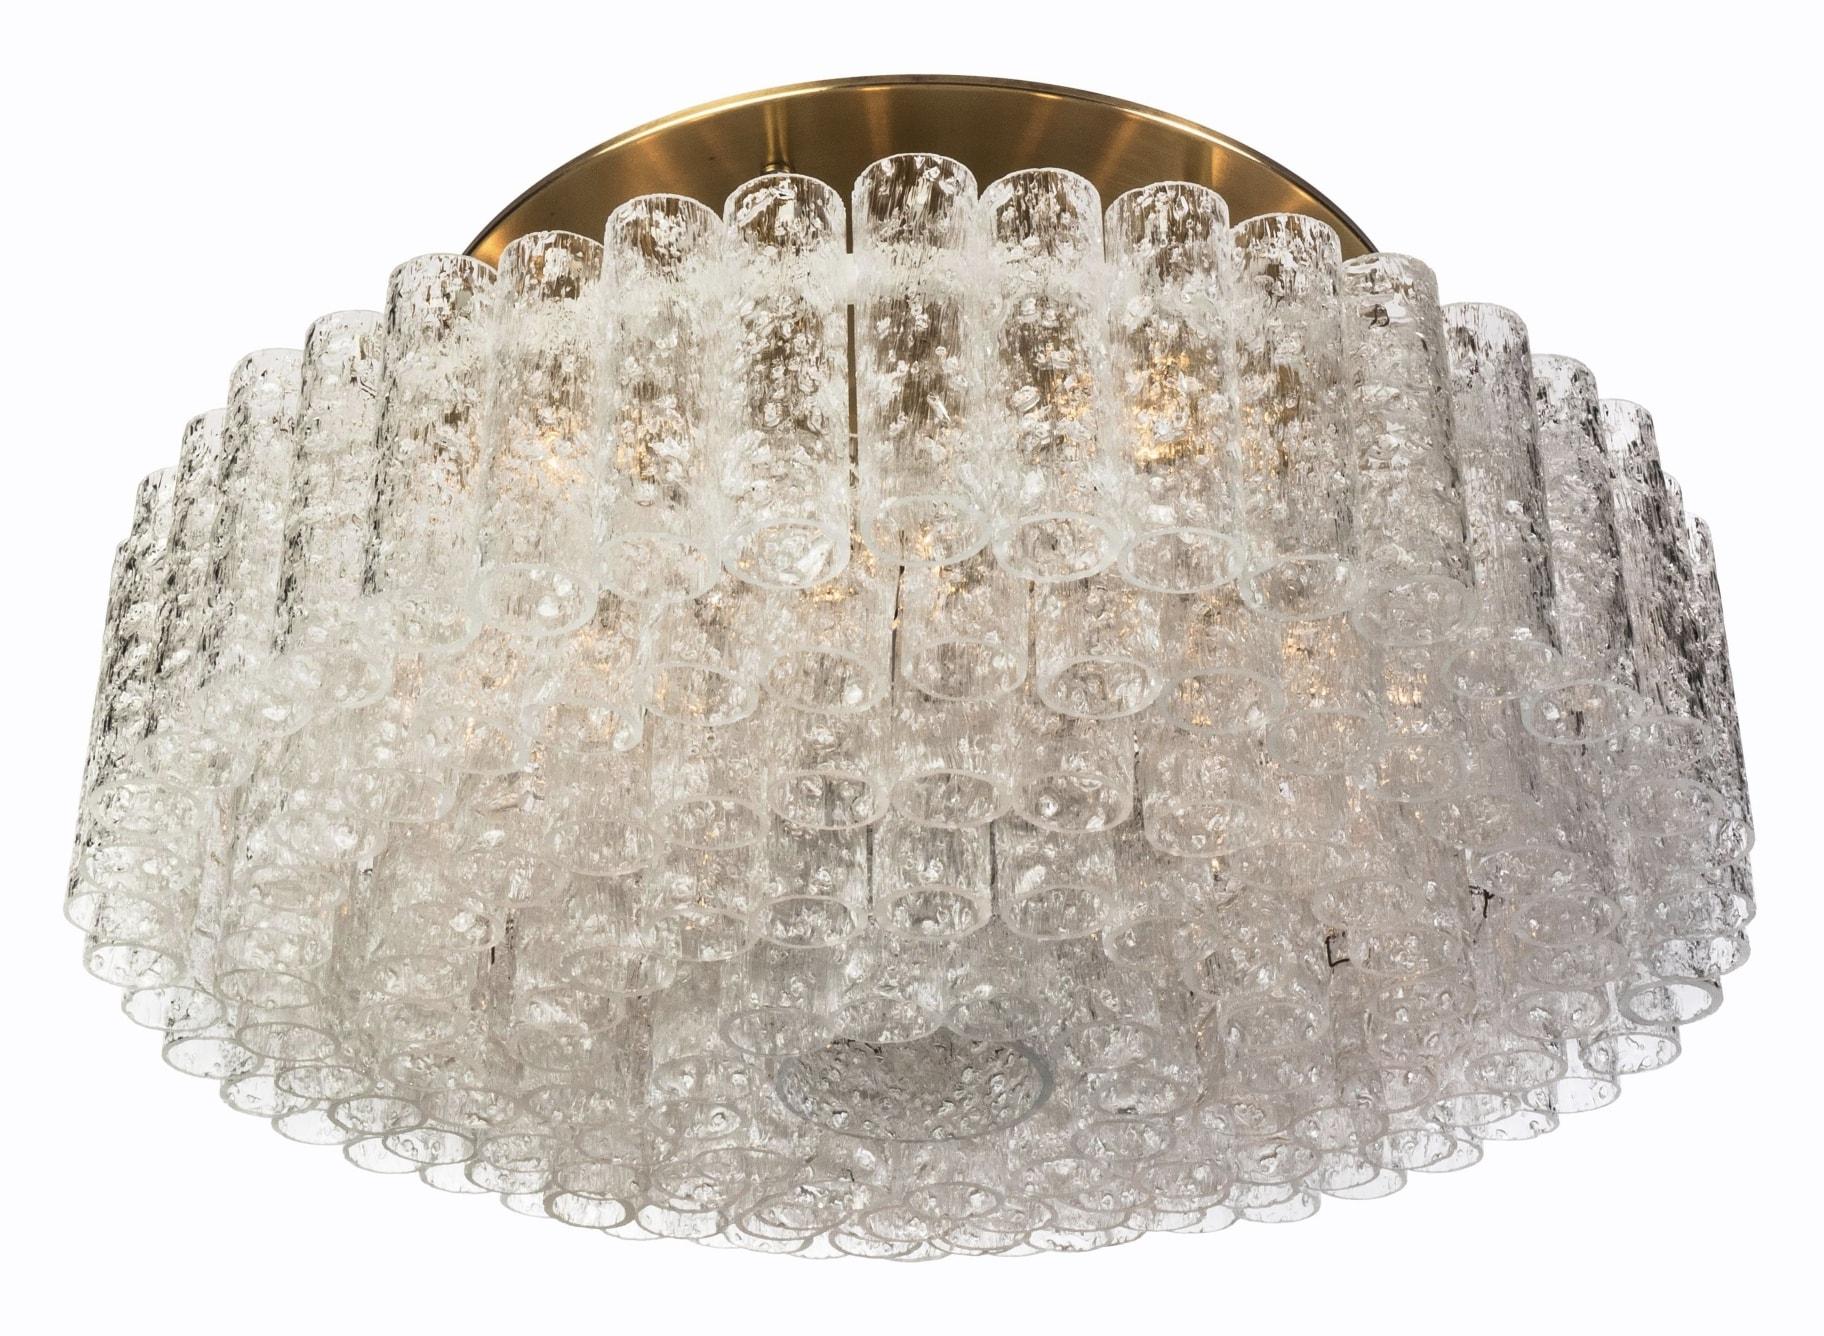 Set of 12 (XL-size) gorgeous, 1950s Mid-Century Modernist flush mount chandeliers was designed by Doria Leuchten, Germany. It features multi-tiered layers of textured ice glass tubes connected to a circular brushed brass frame. The flush mount with